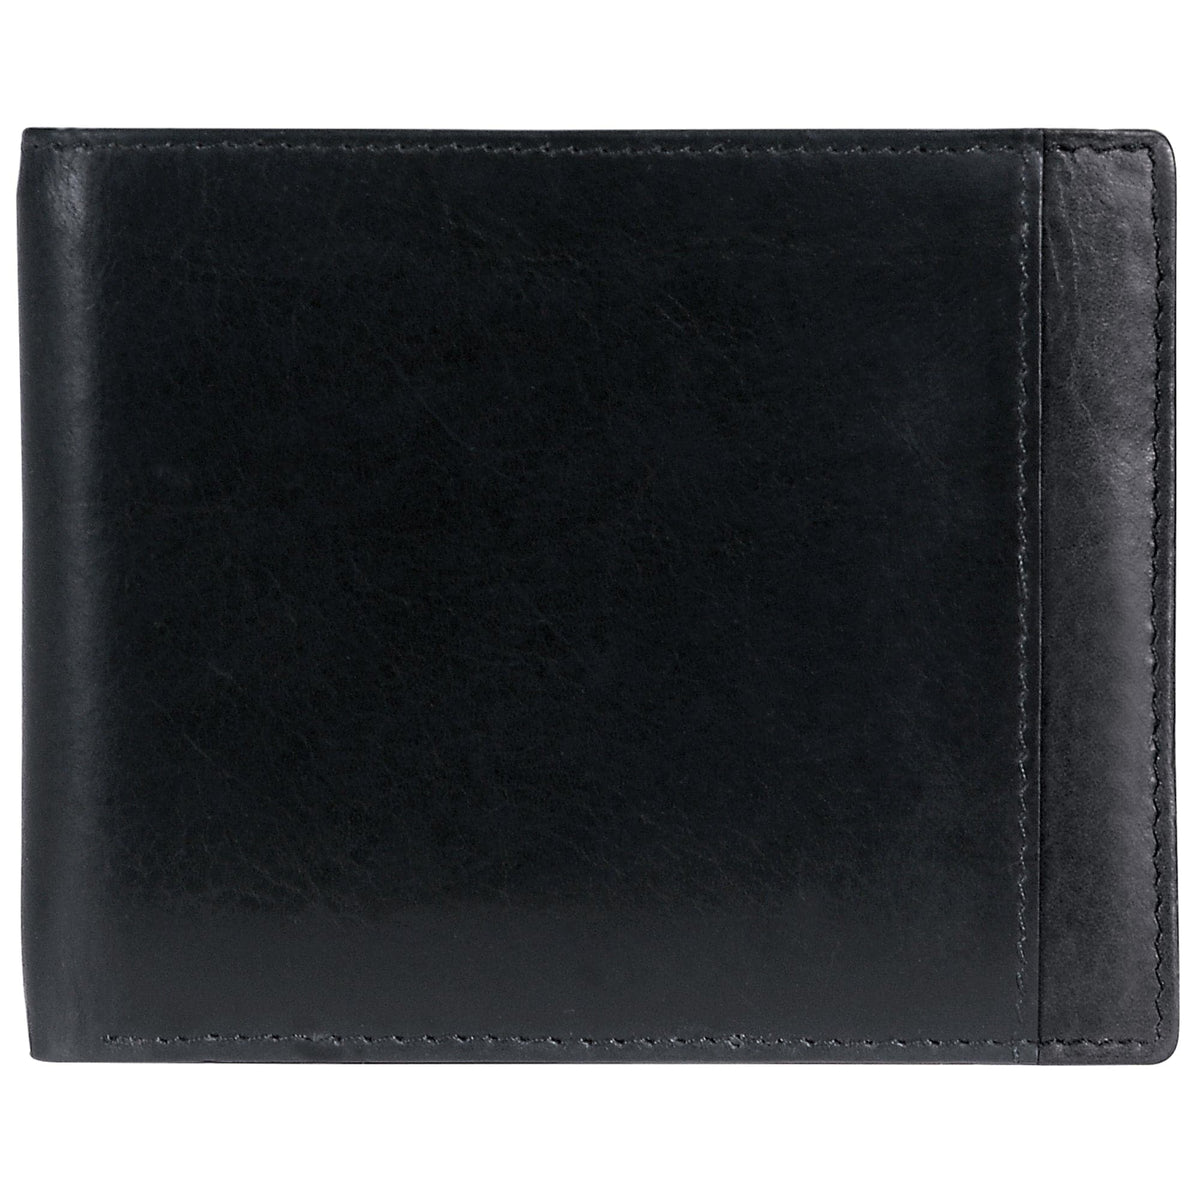 Mancini Casablanca RFID Billfold with Removable Passcase